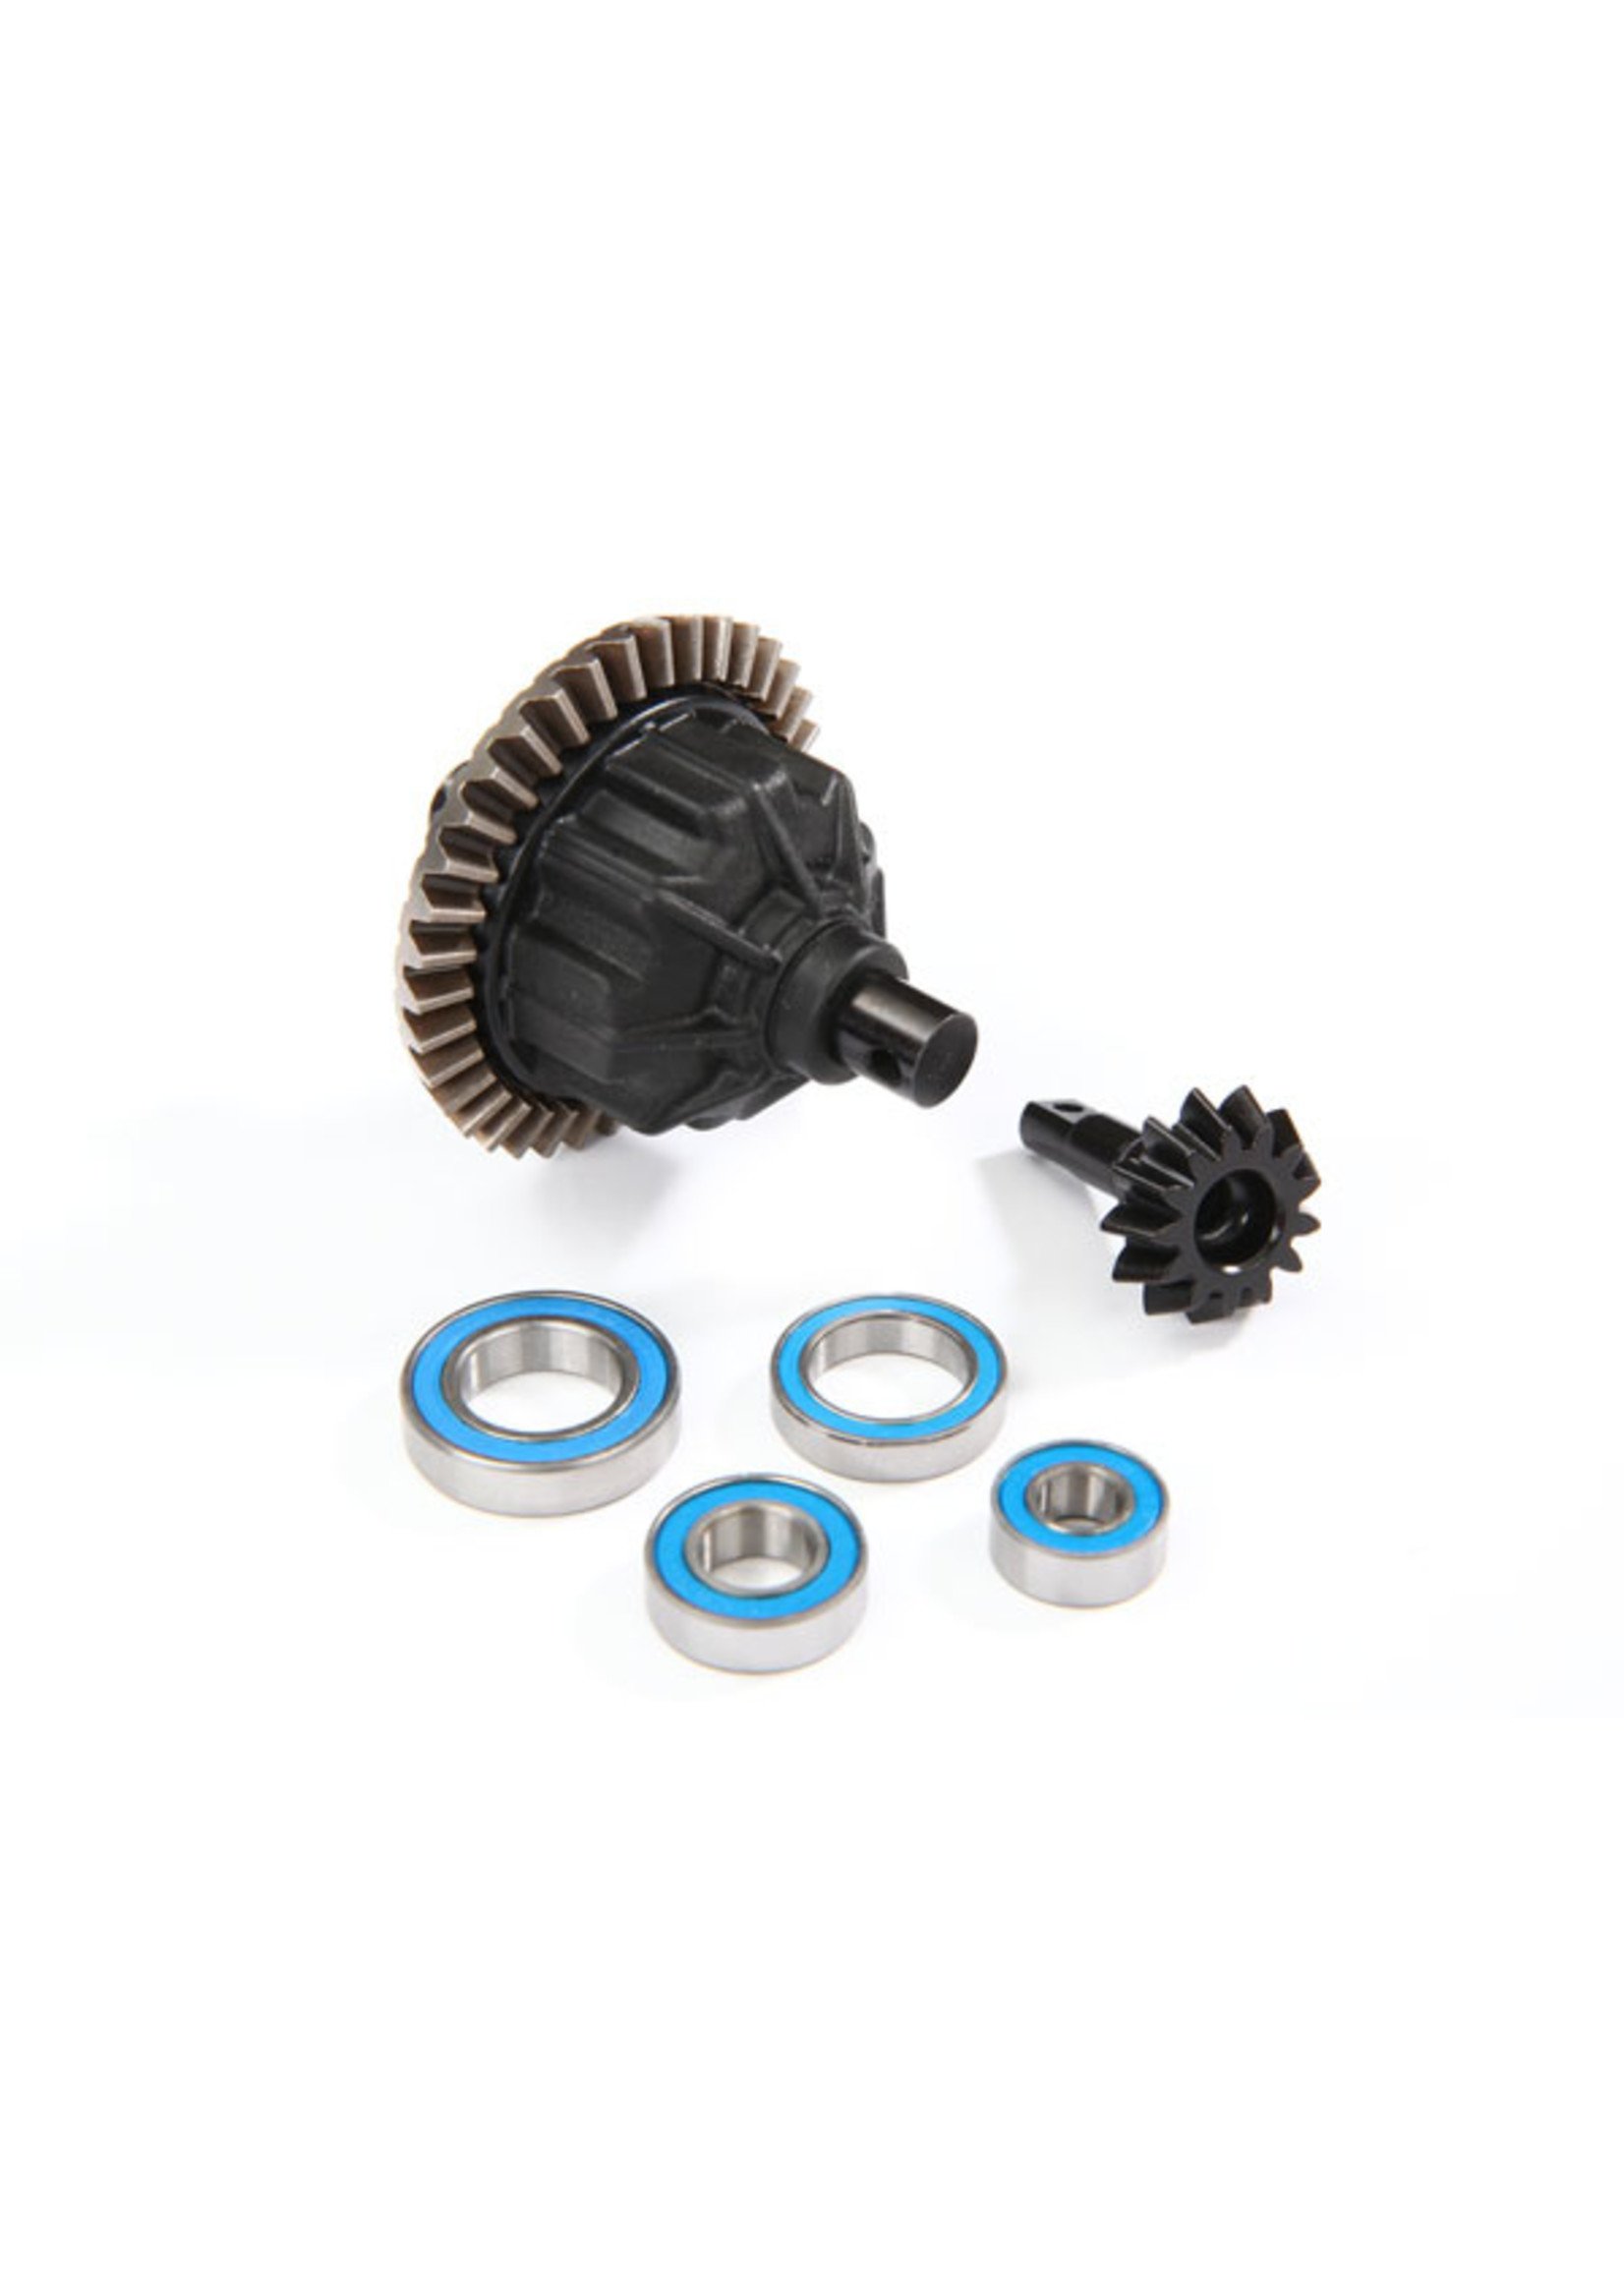 Traxxas 8686 - Differential, Complete, Front or Rear